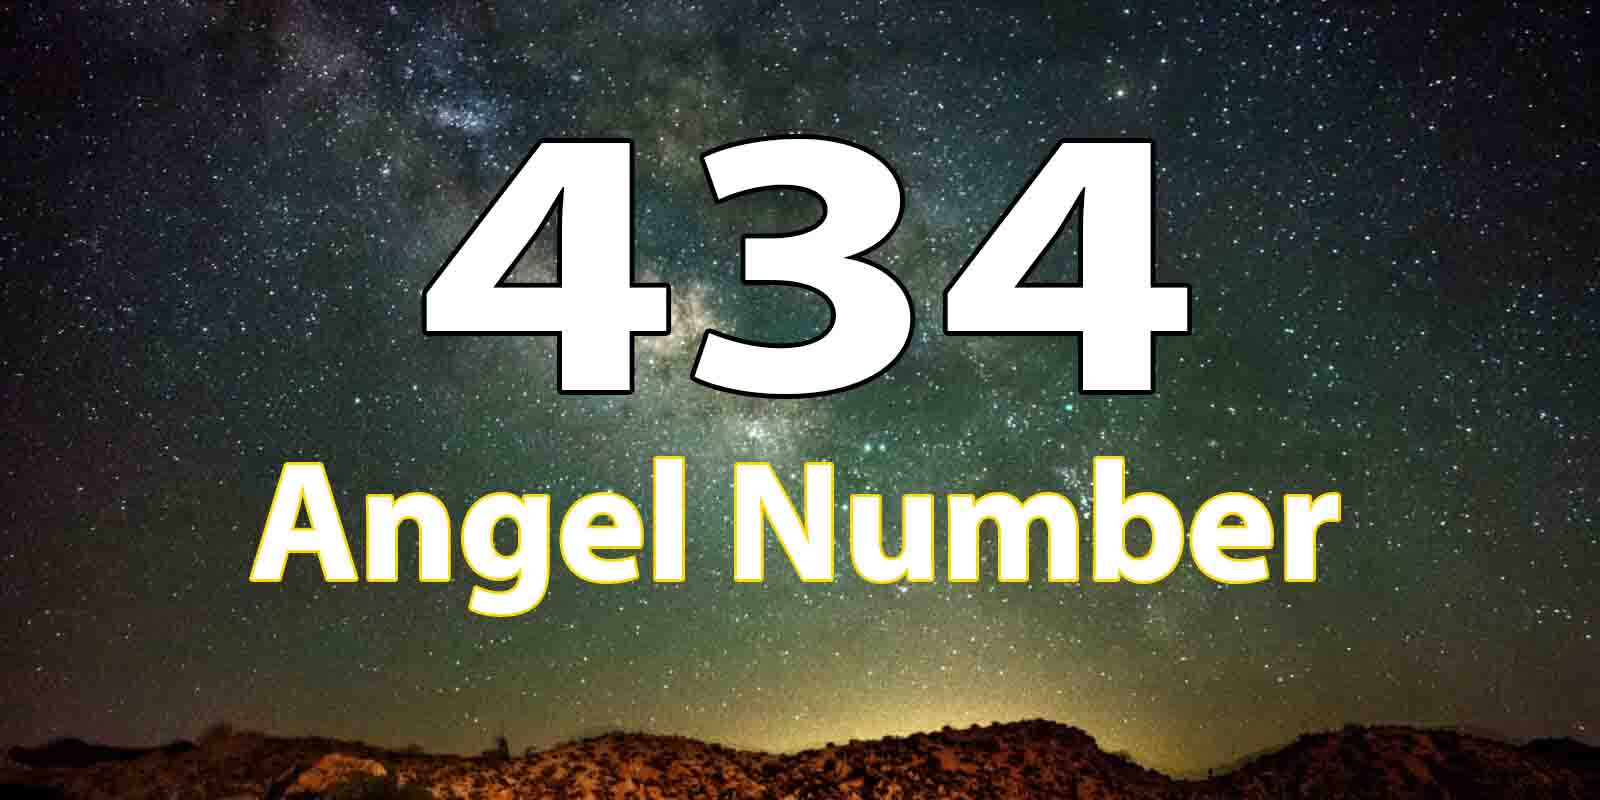 434 Angel Number Meaning